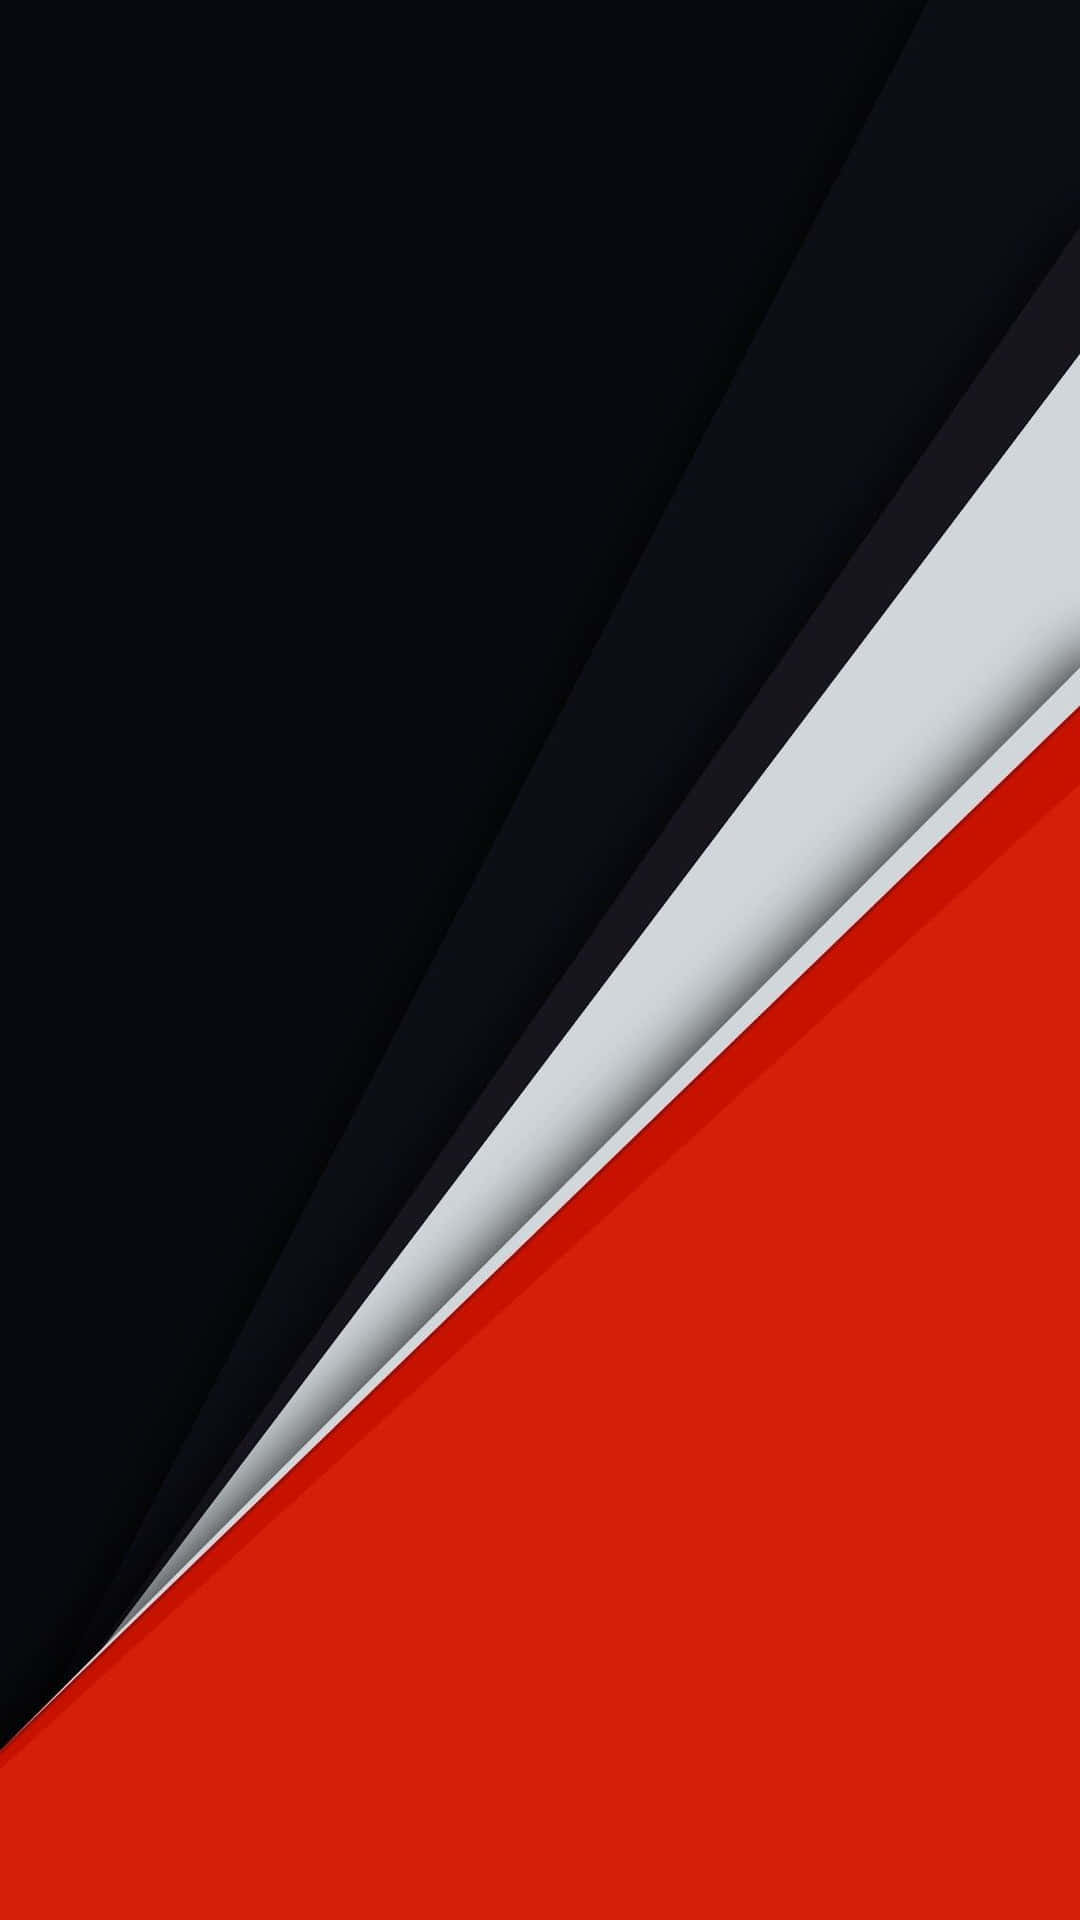 Vibrant Red, White And Black Abstract Wallpaper